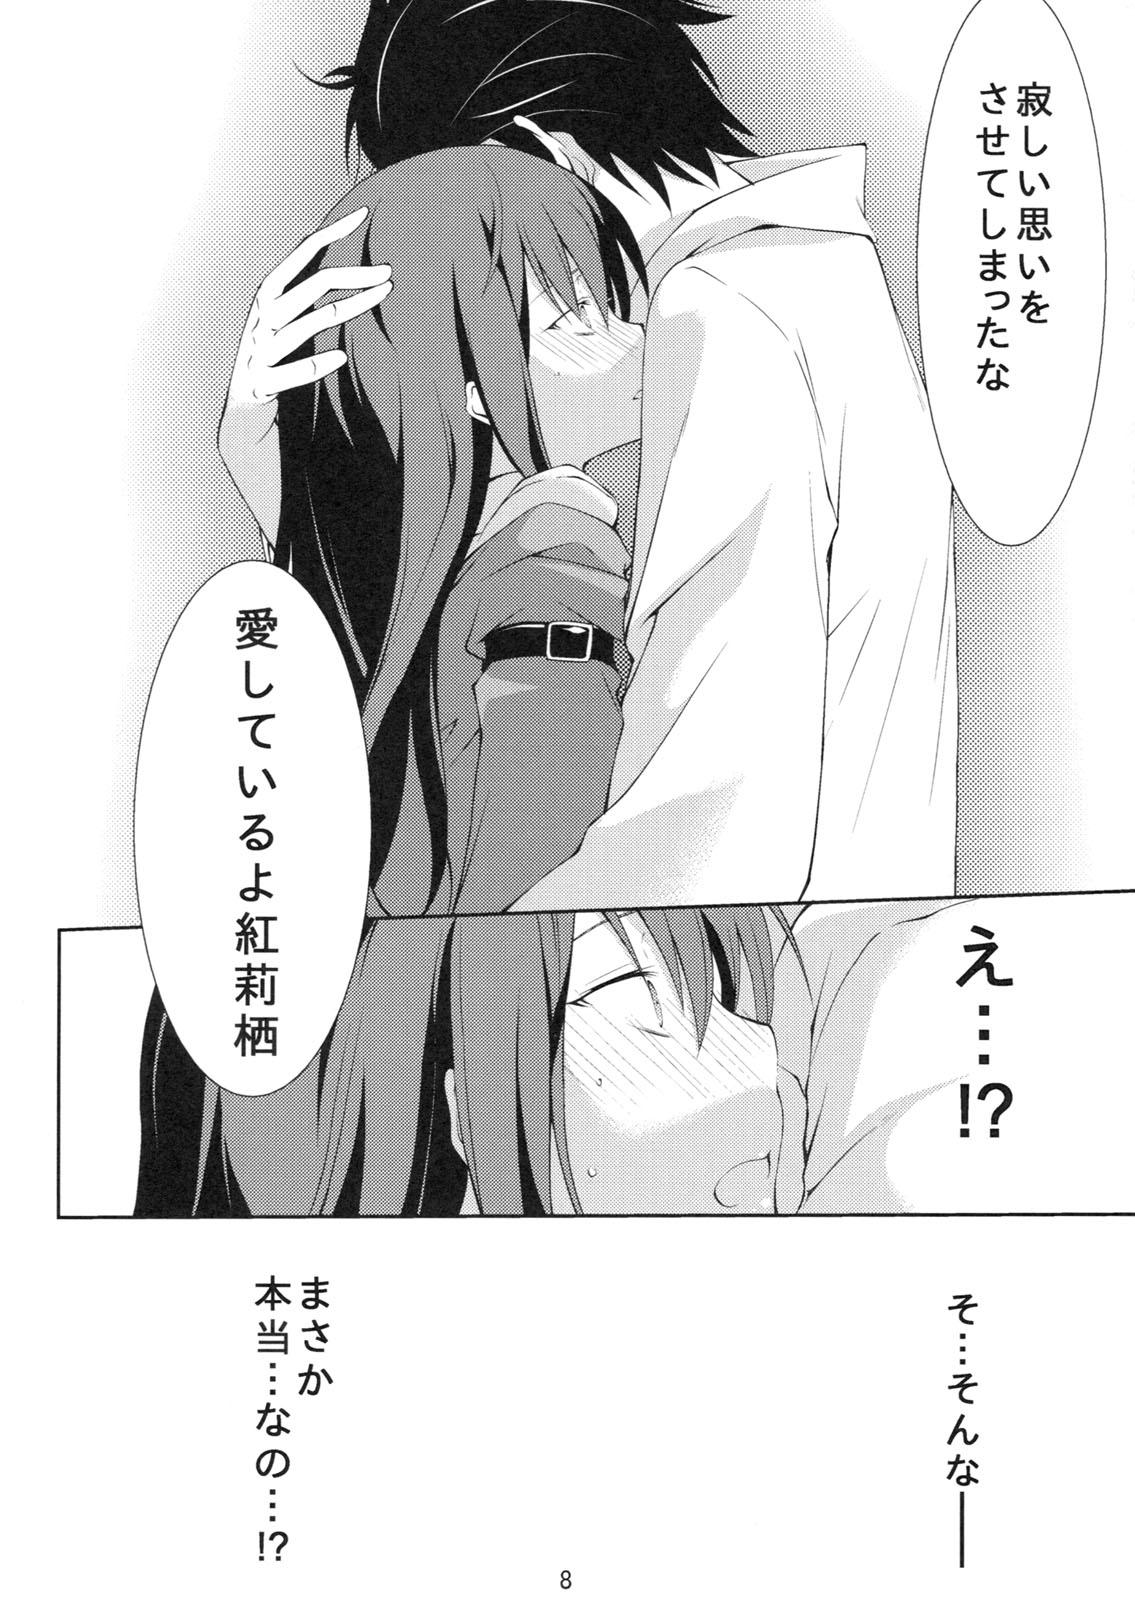 Anime Embrace - Steinsgate Real Sex - Page 8